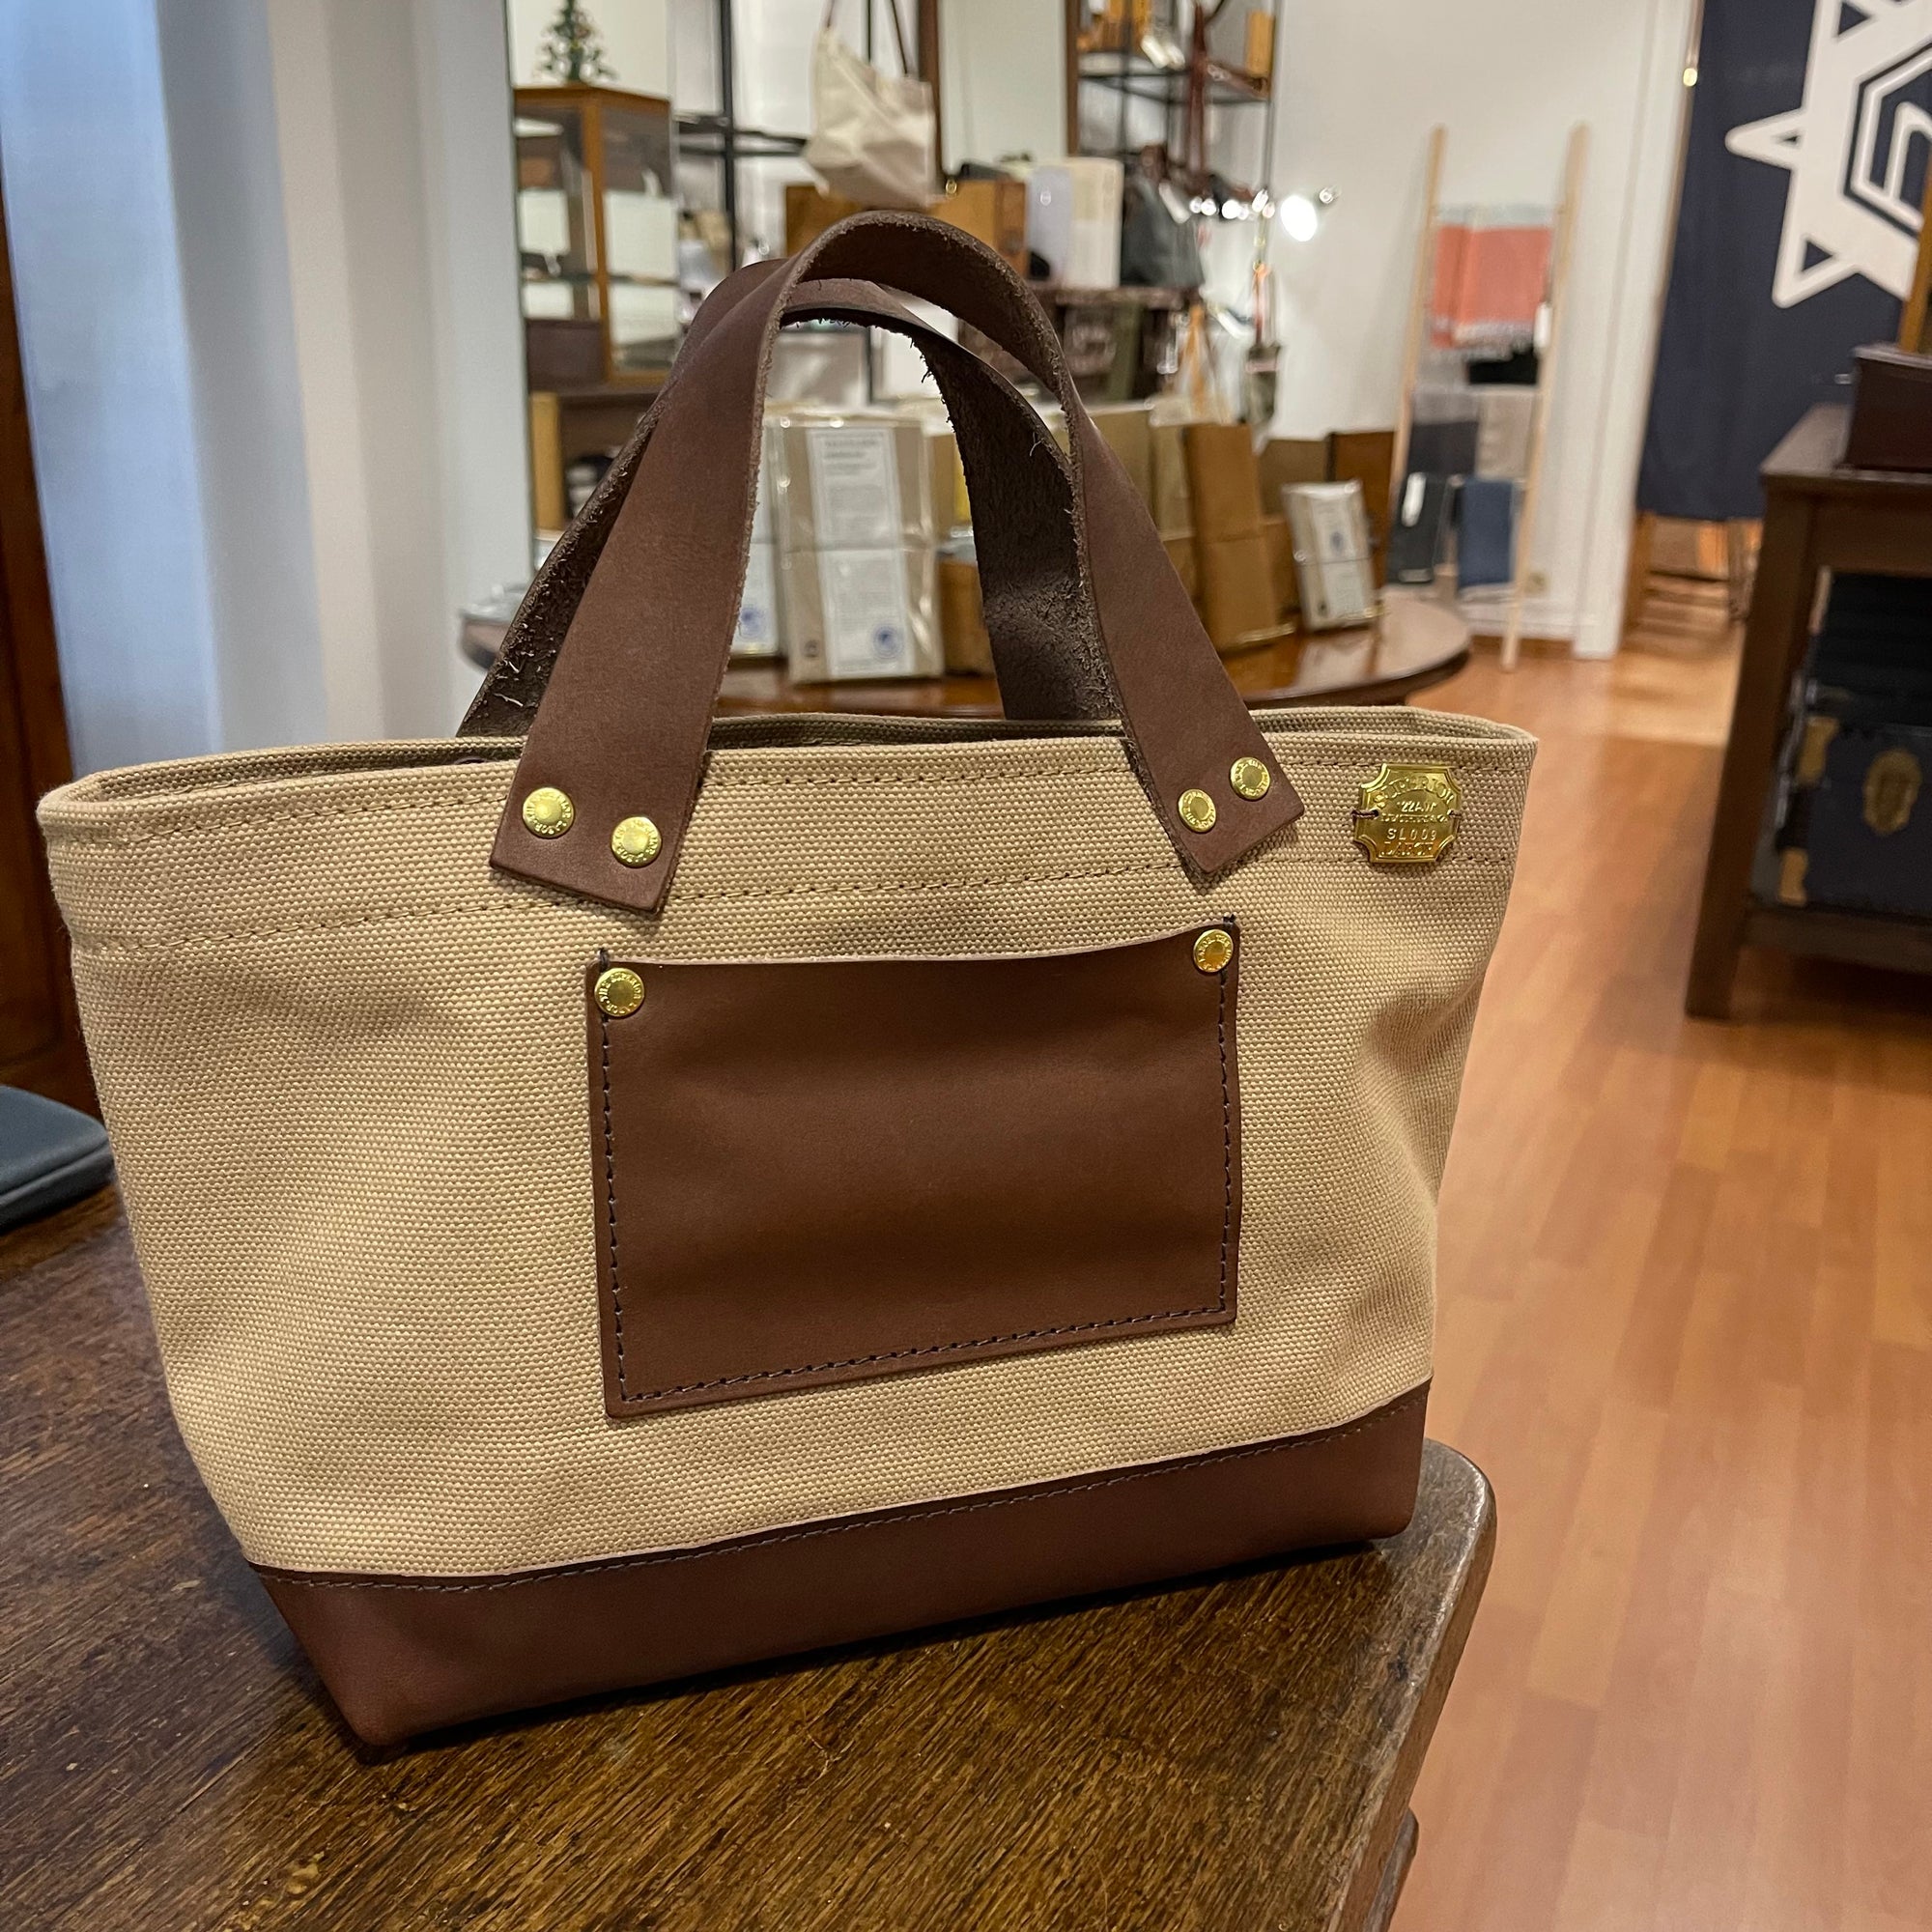 The Superior Labor Engineer Bag Petite Ltd Edition beige/brown canvas & leather